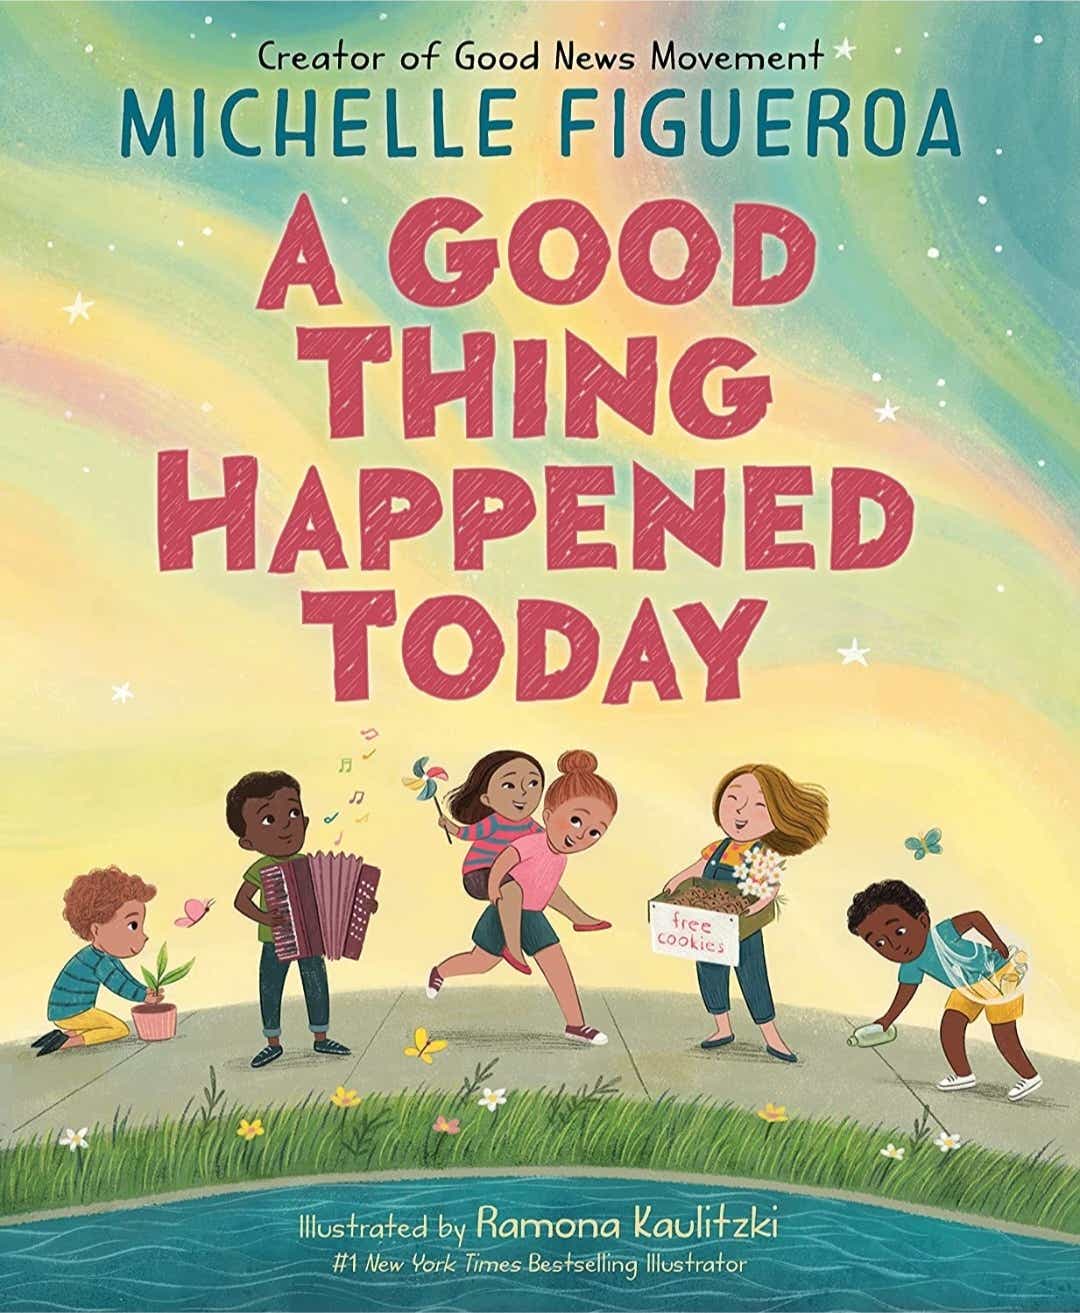 The cover of Michelle Figueroa's childrens book, which features cartoon children doing kind acts like recycling, planting trees, playing music, and giving away food.